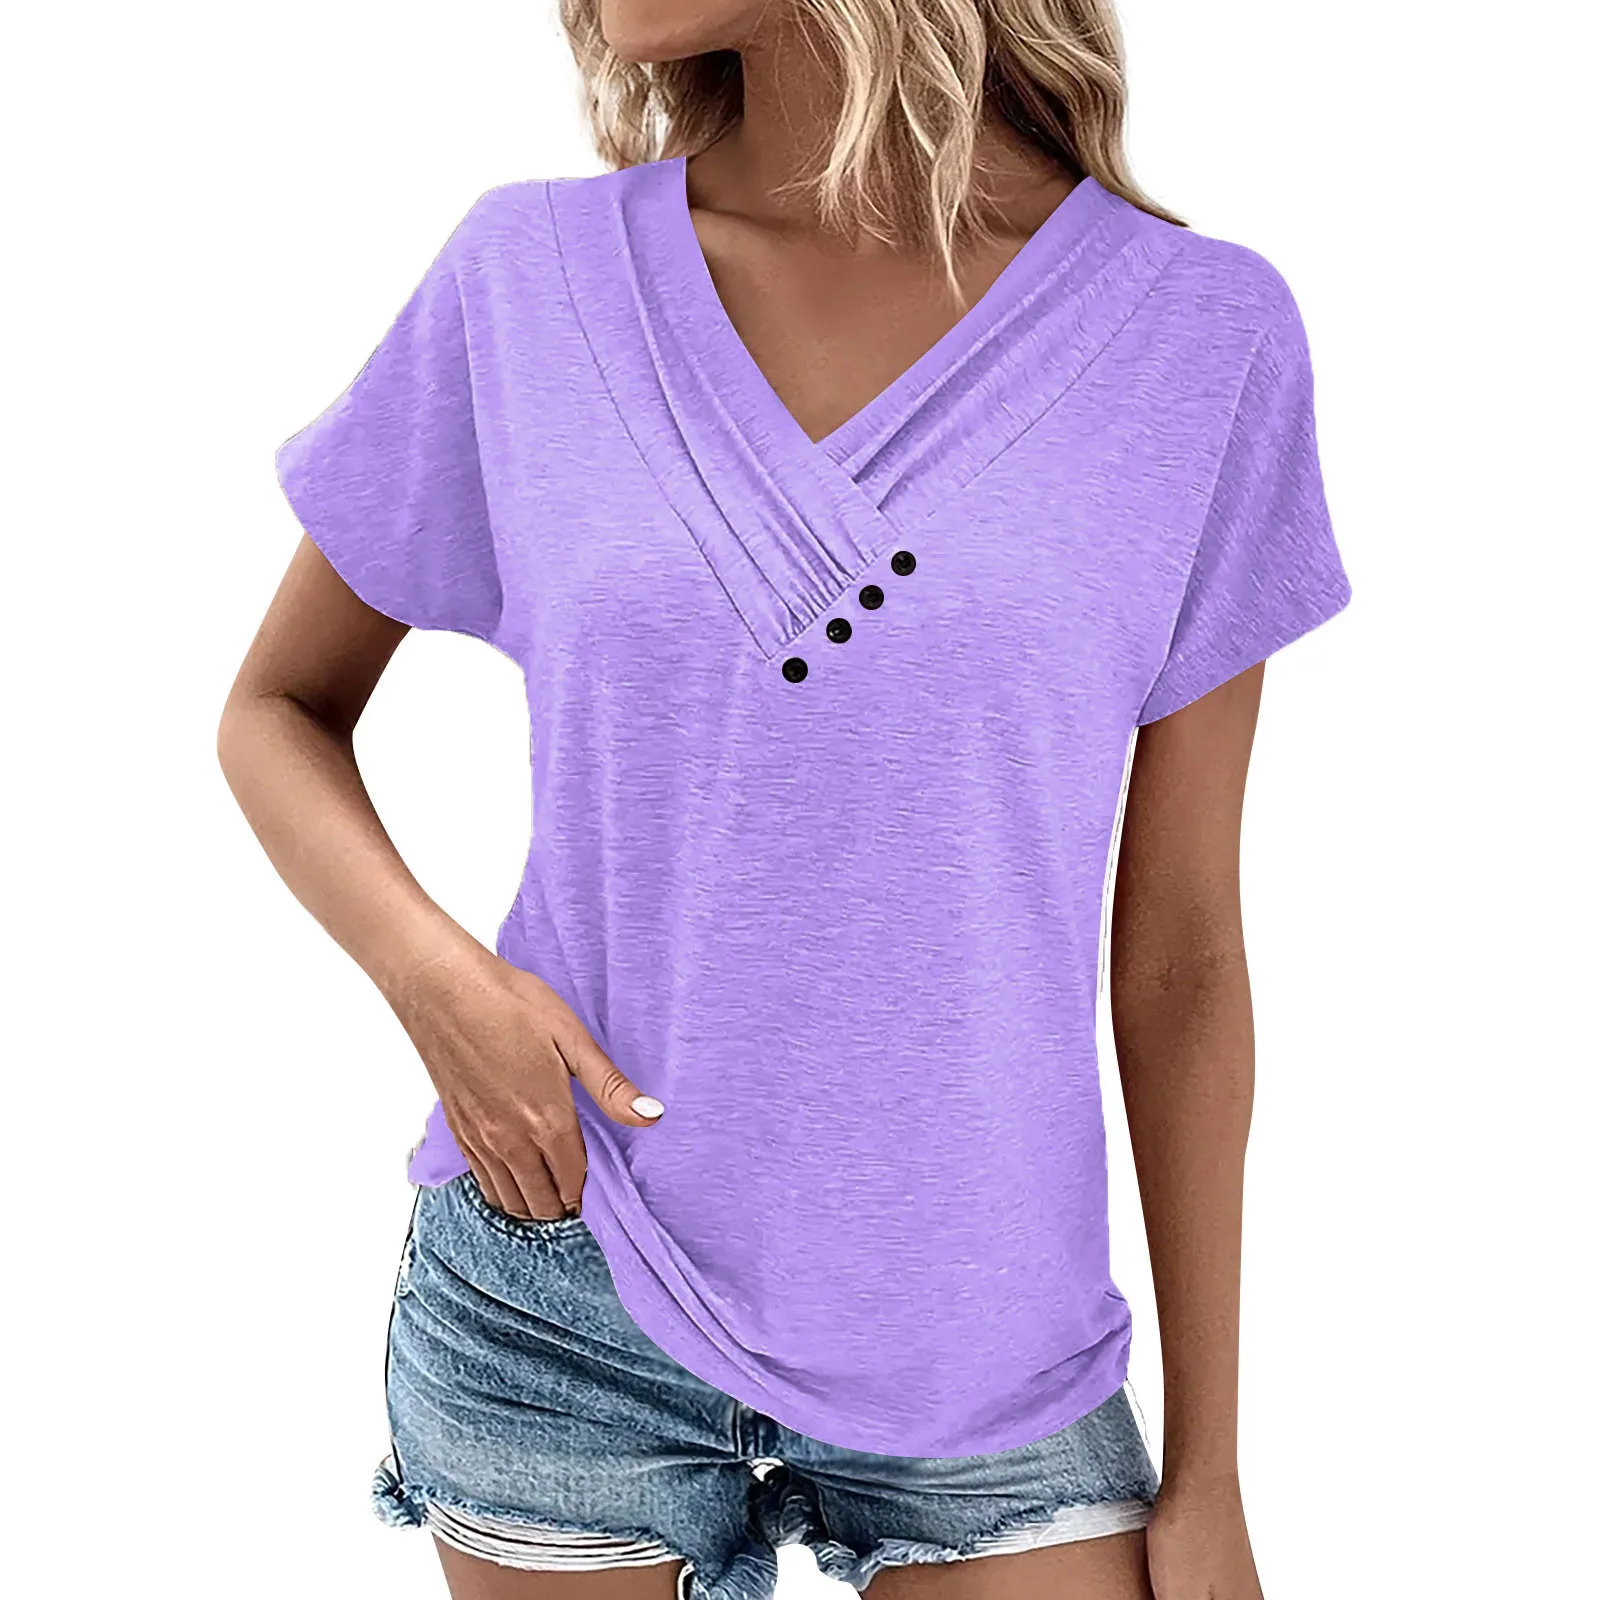 

Womens Tops Oversized Tshirts Roupas Femininas Top Female Summer Tops For Women Solid Color For Women V-Neck Short Sleeve Comfy